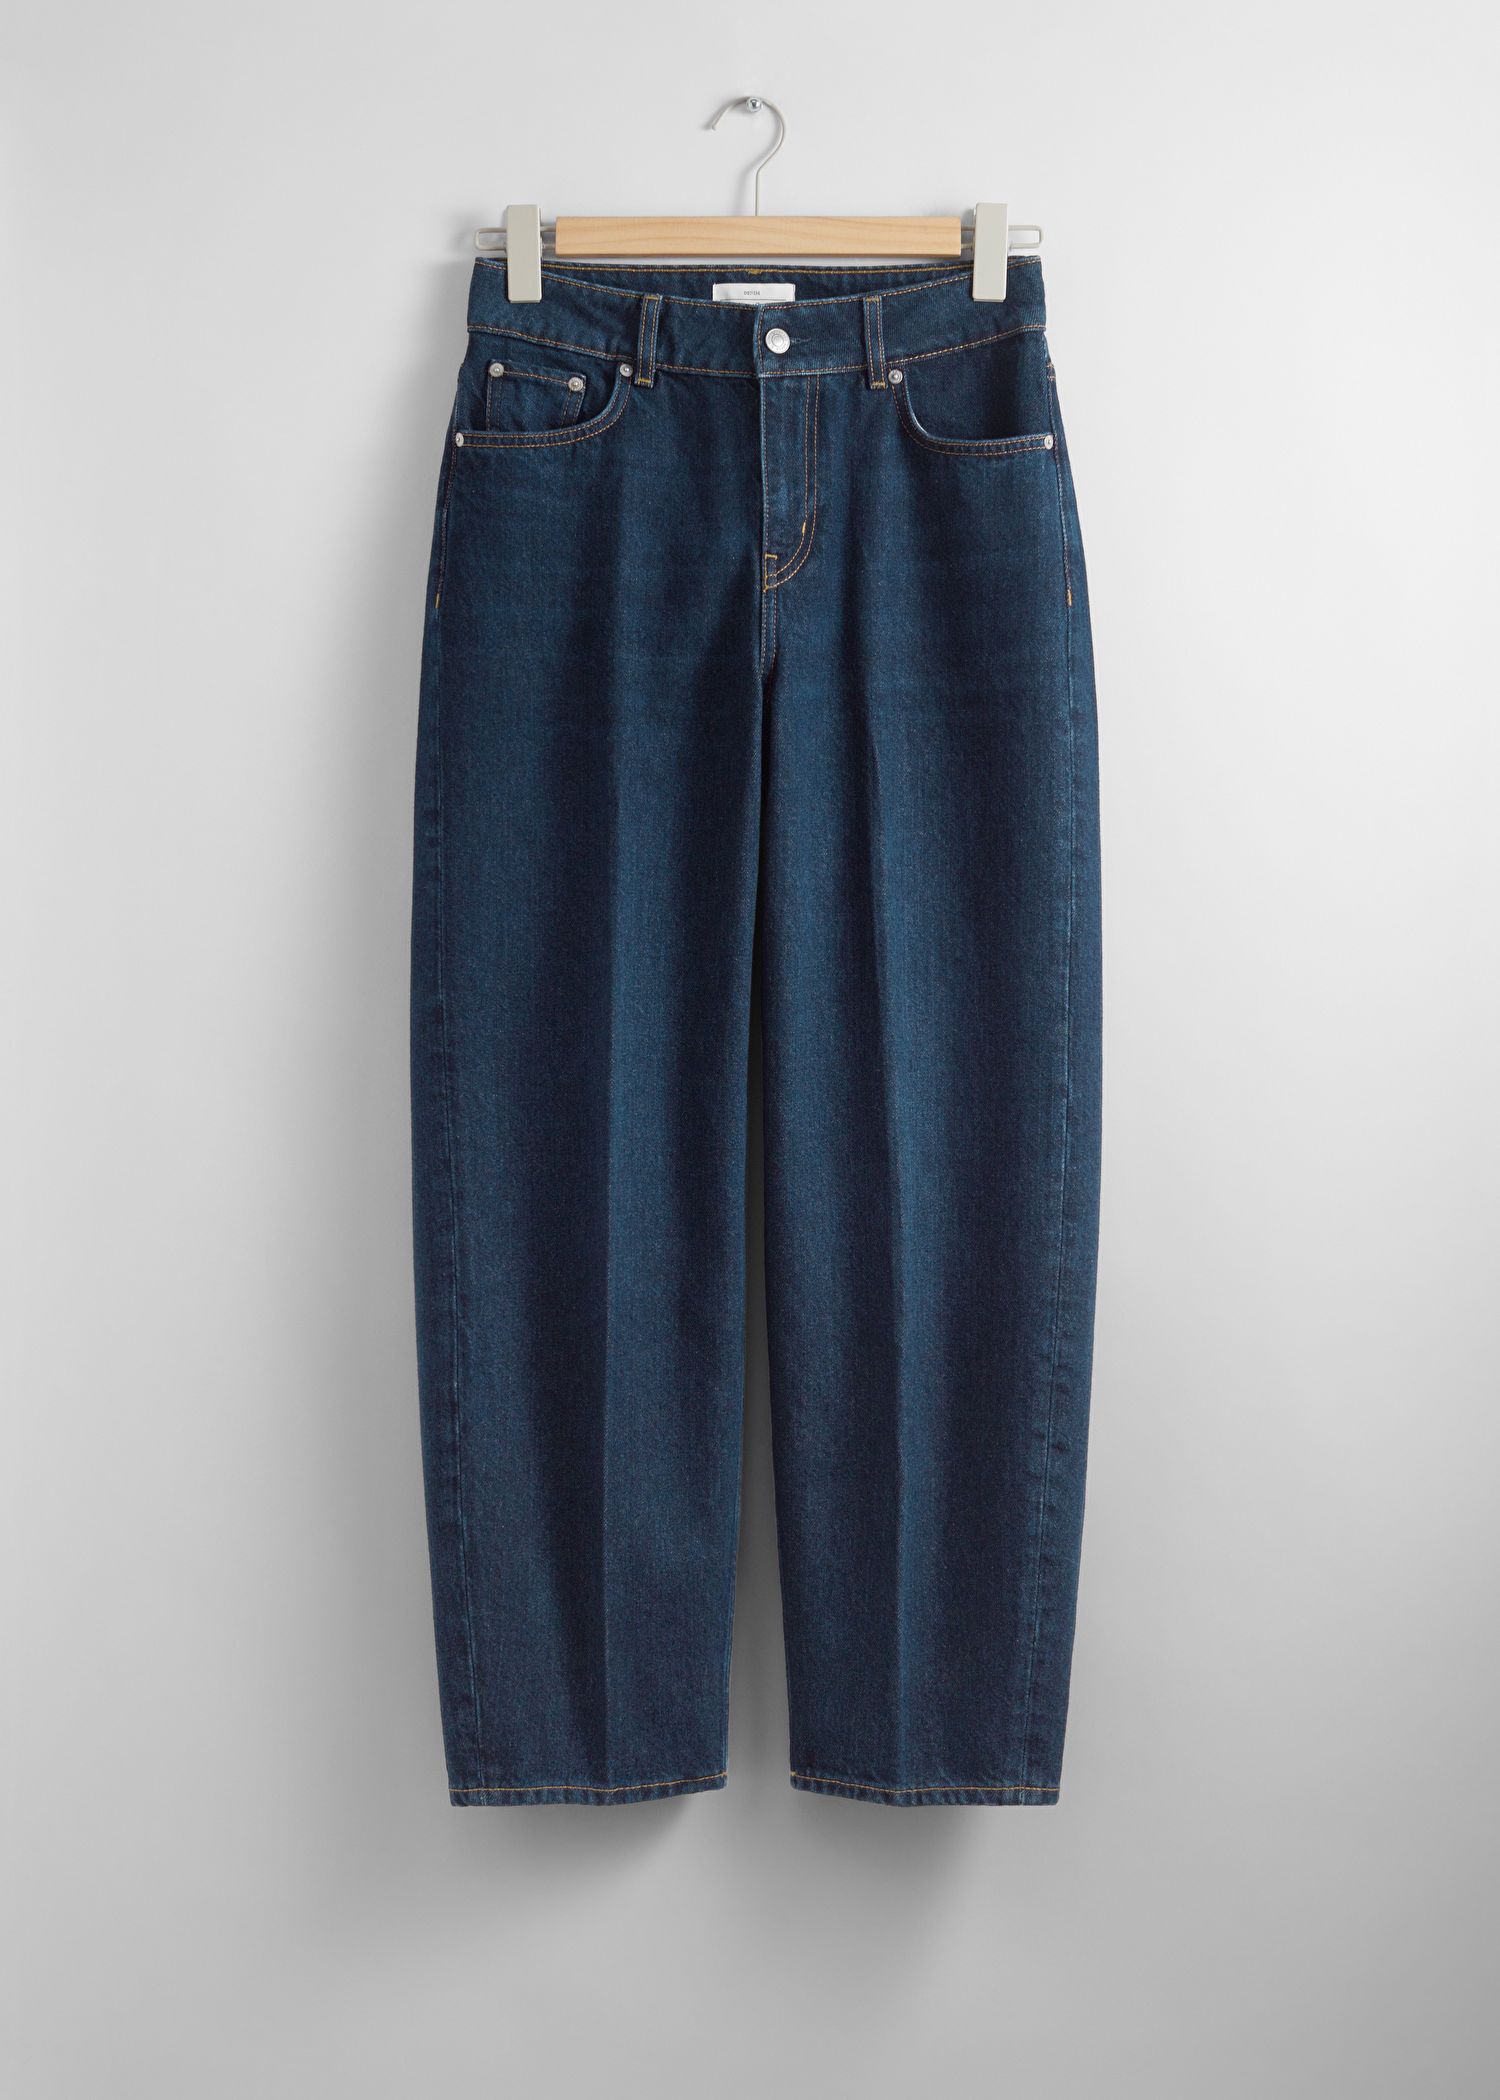 Cropped Barrel-Leg Jeans | & Other Stories US